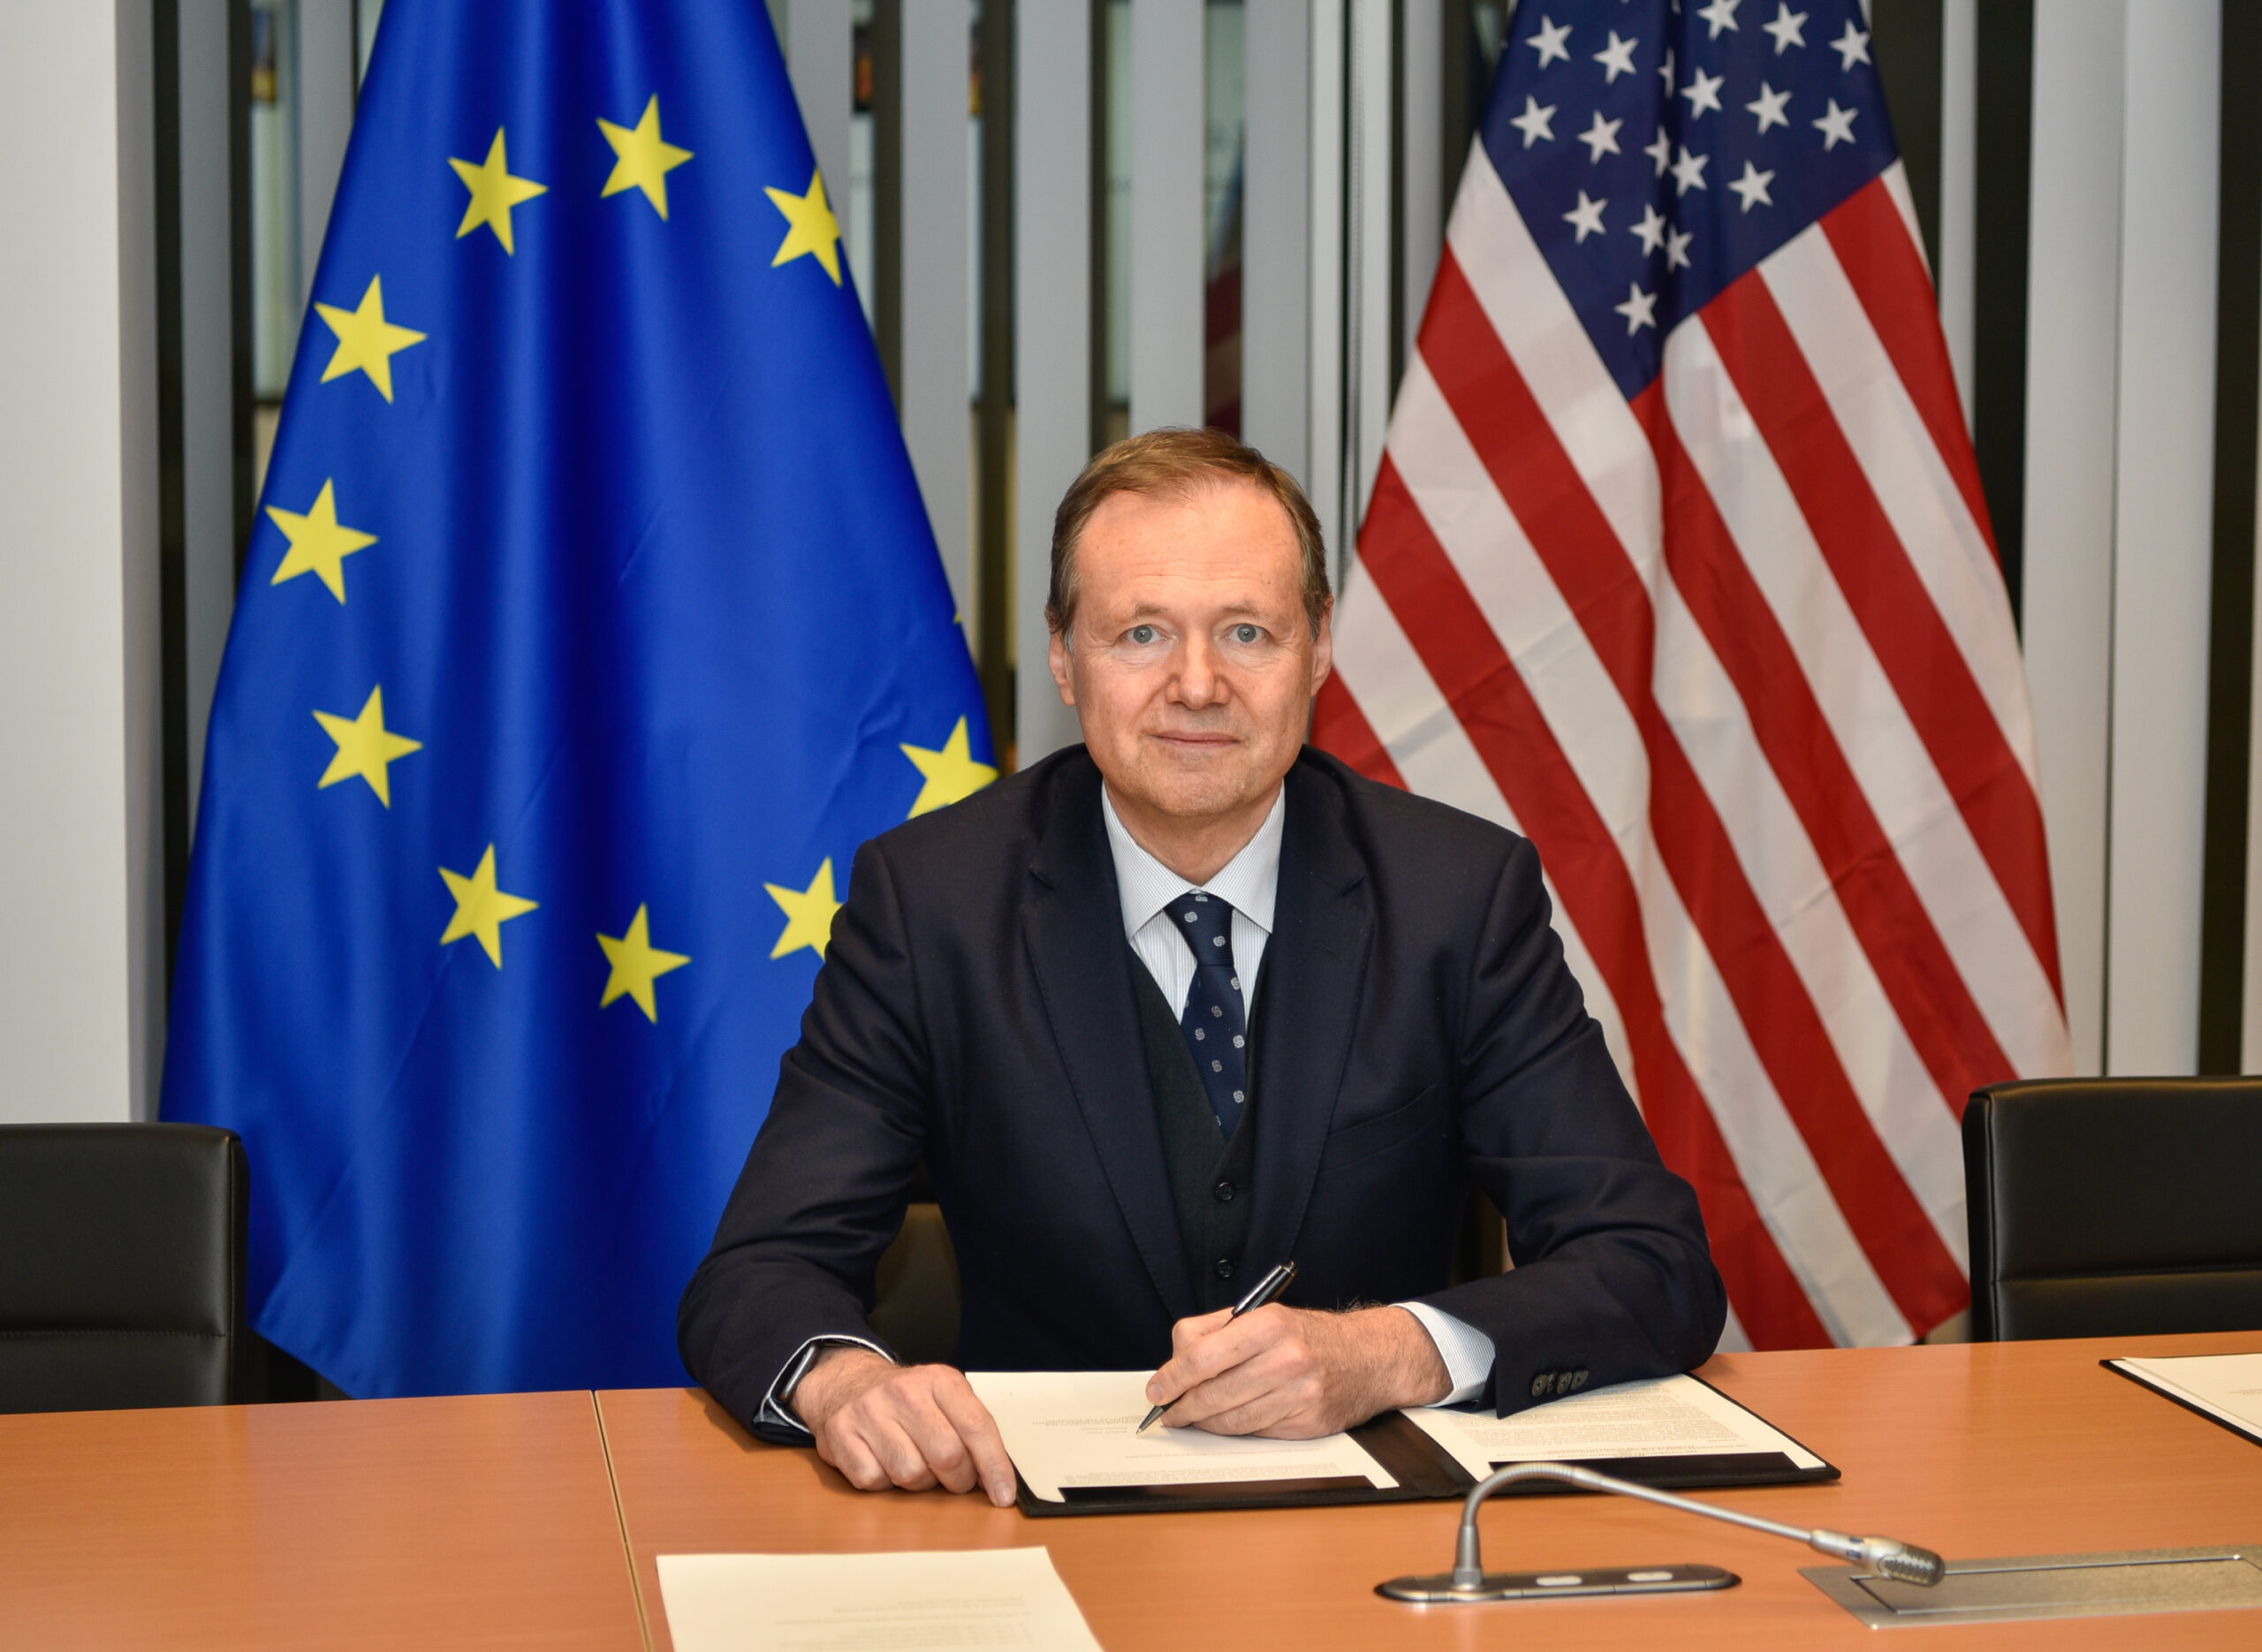 US and EU agree to collaborate on improving lives with AI